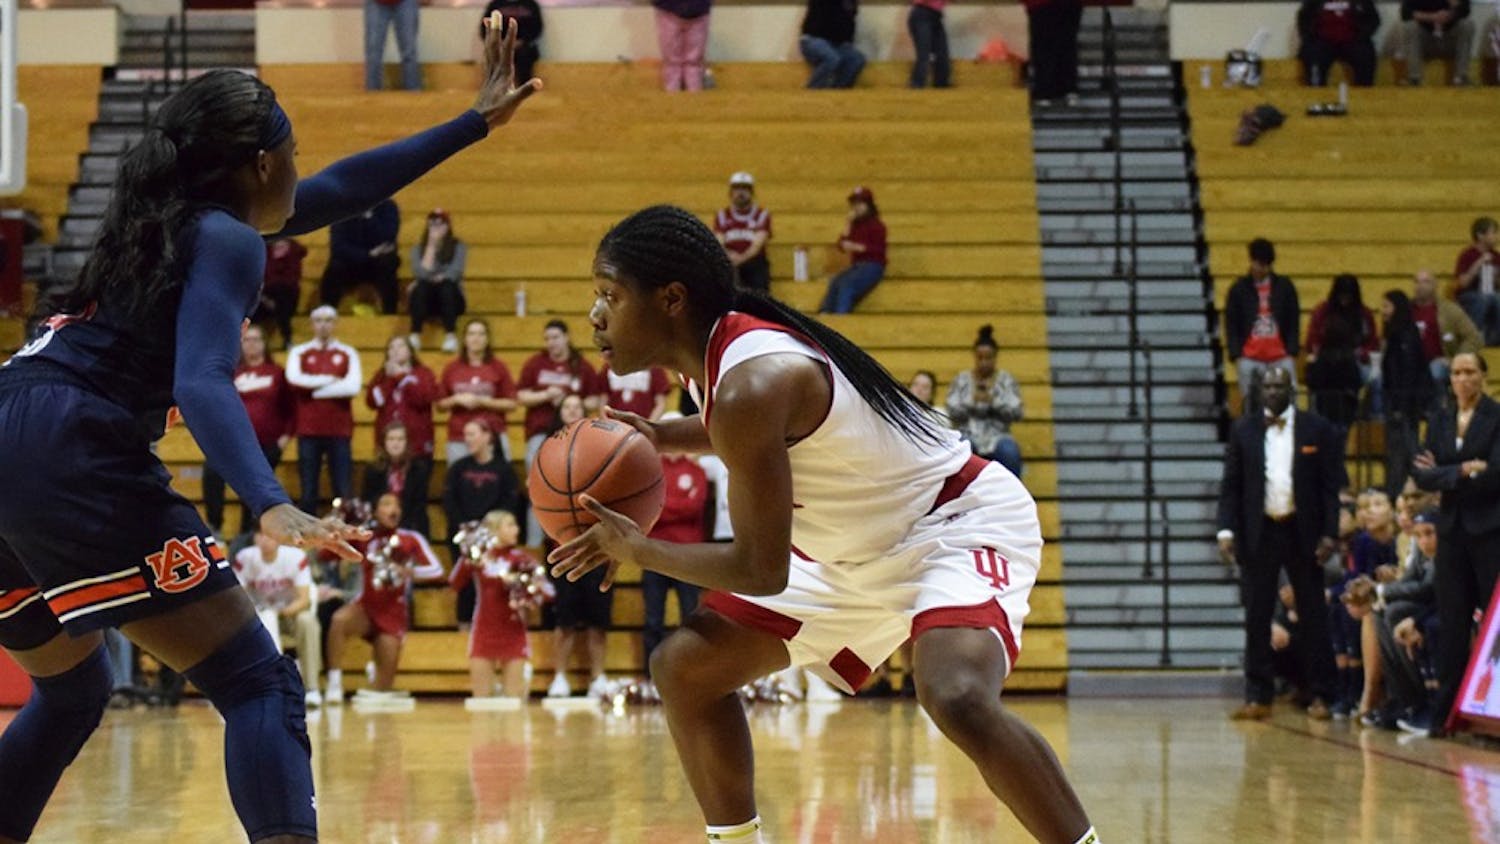 Freshman guard Bendu Yeaney looks for a chance to pass the ball to one of her teammates near the end of the game against Auburn on Sunday. IU lost, 65-53, at Simon Skjodt Assembly Hall.